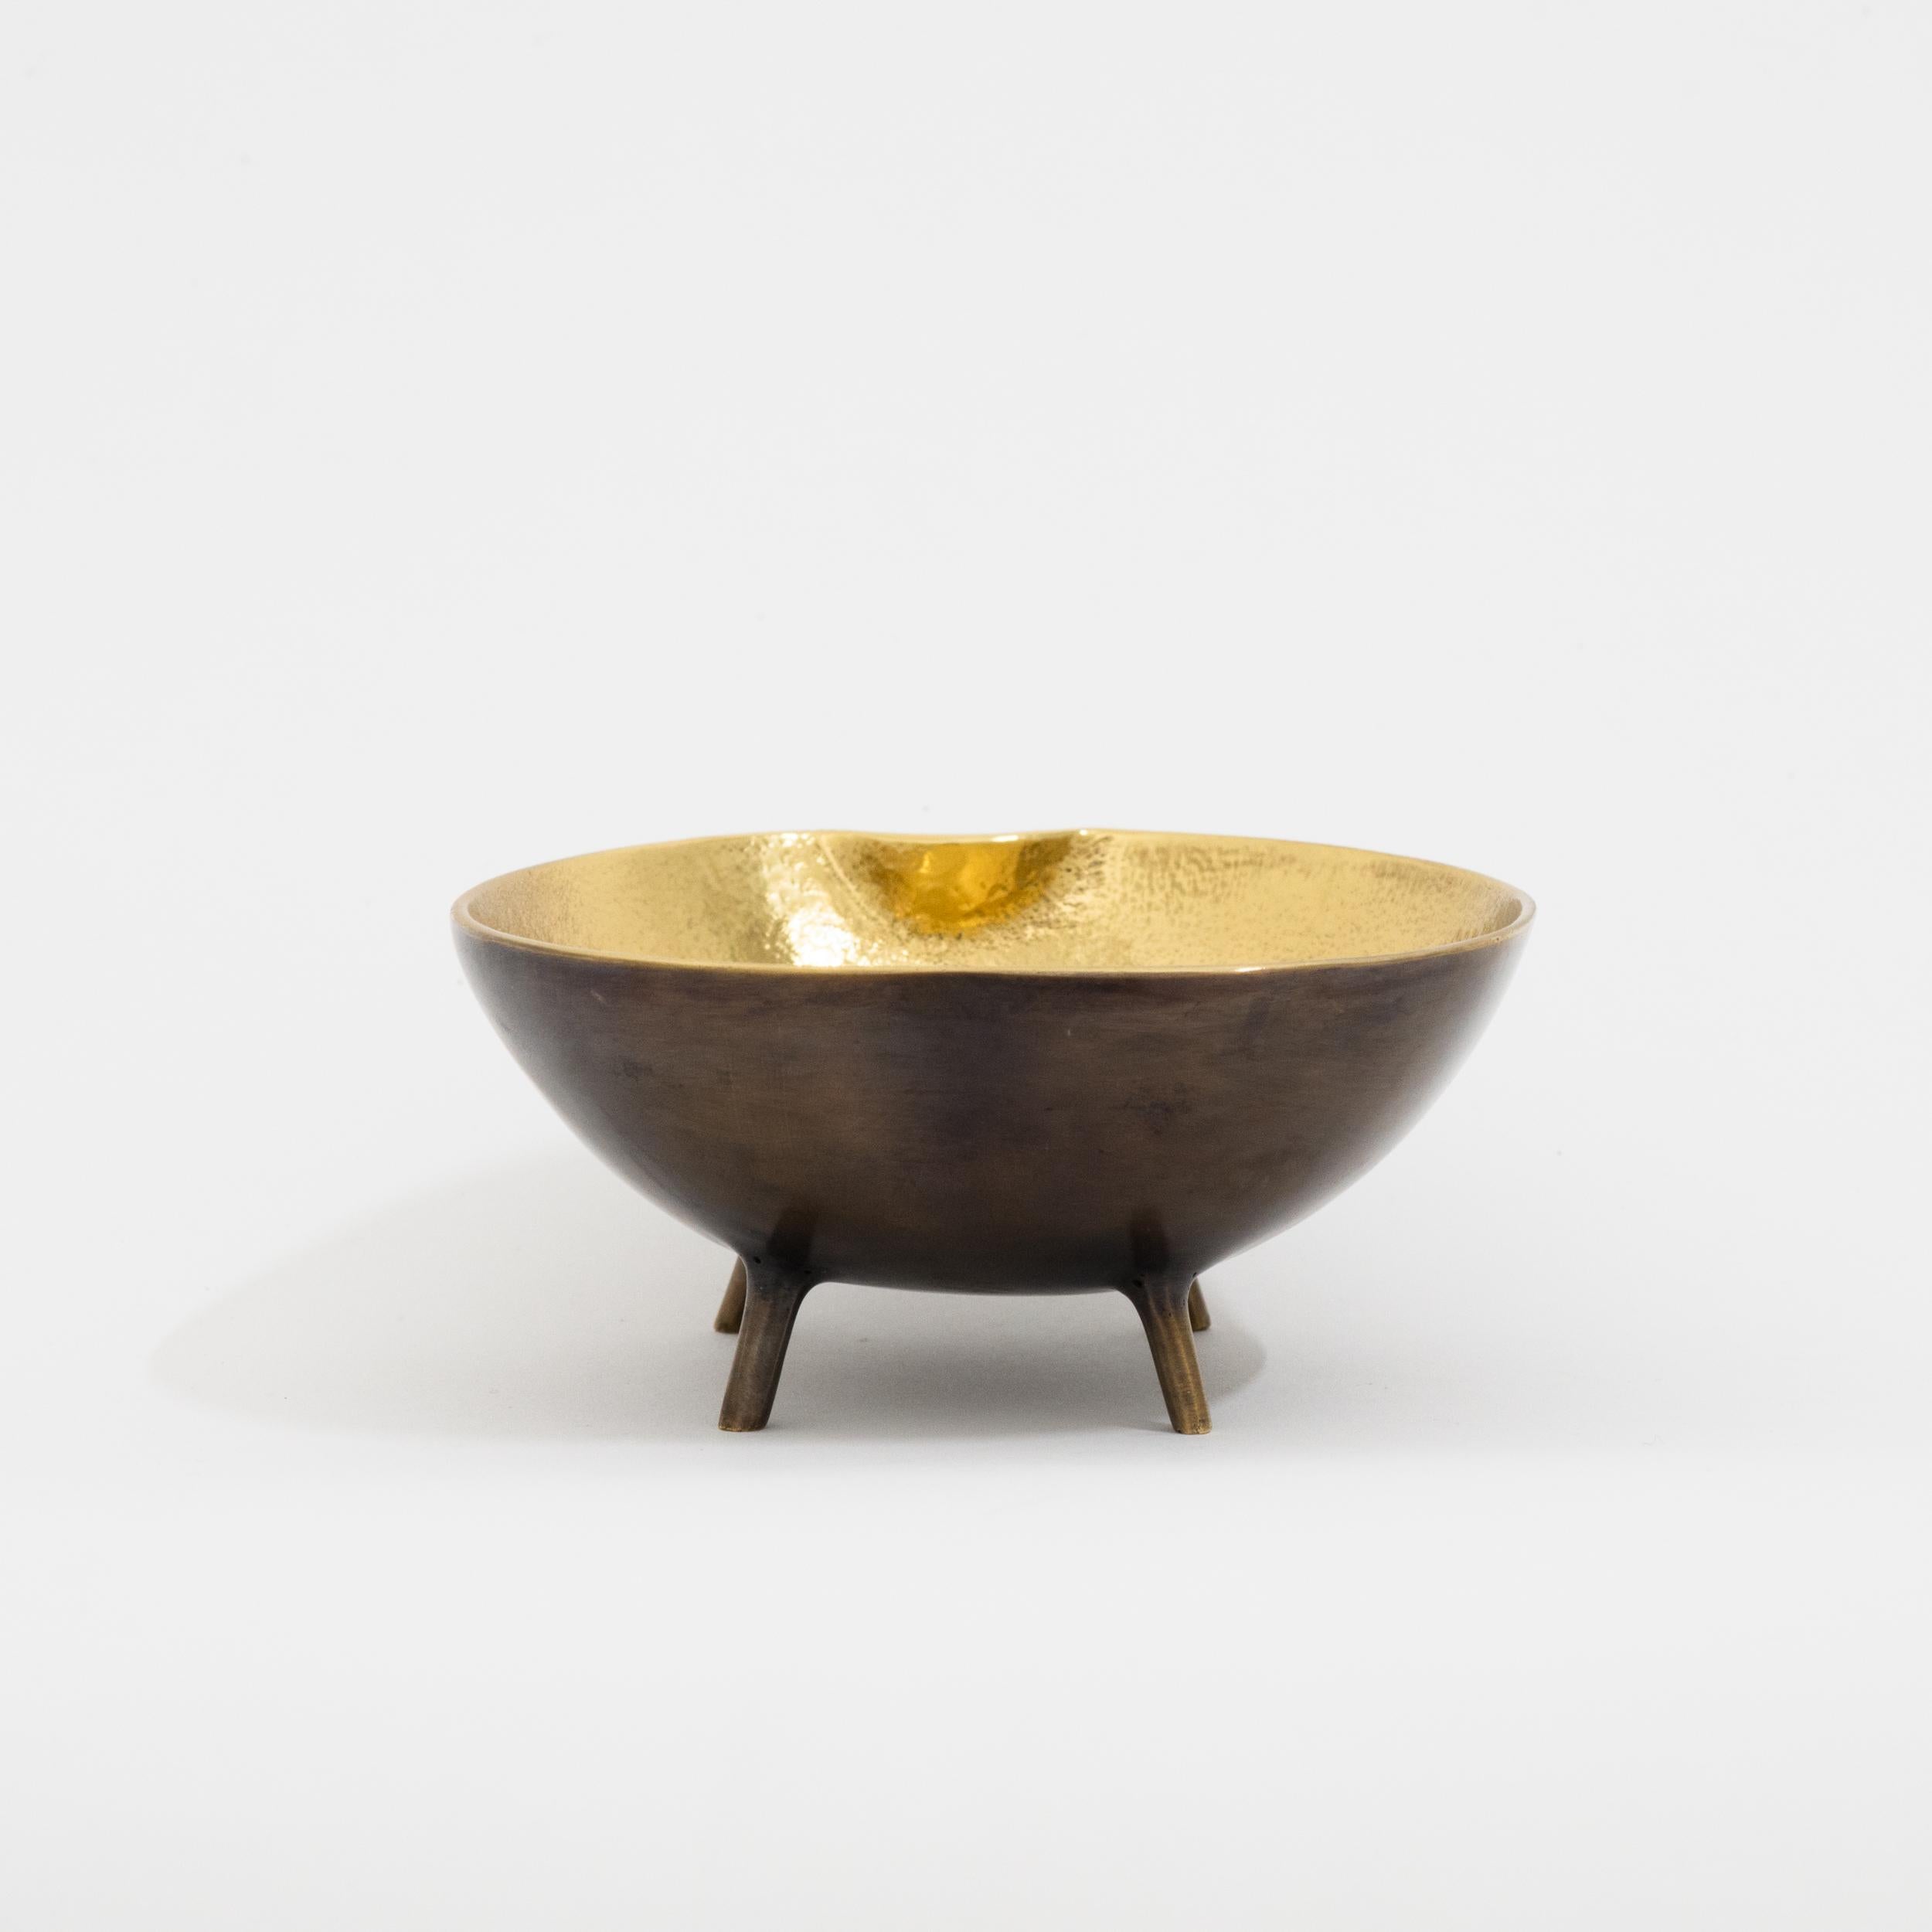 Contemporary Cast Brass Decorative Bowl with Legs, Vide-poche, with Bronze Patina For Sale